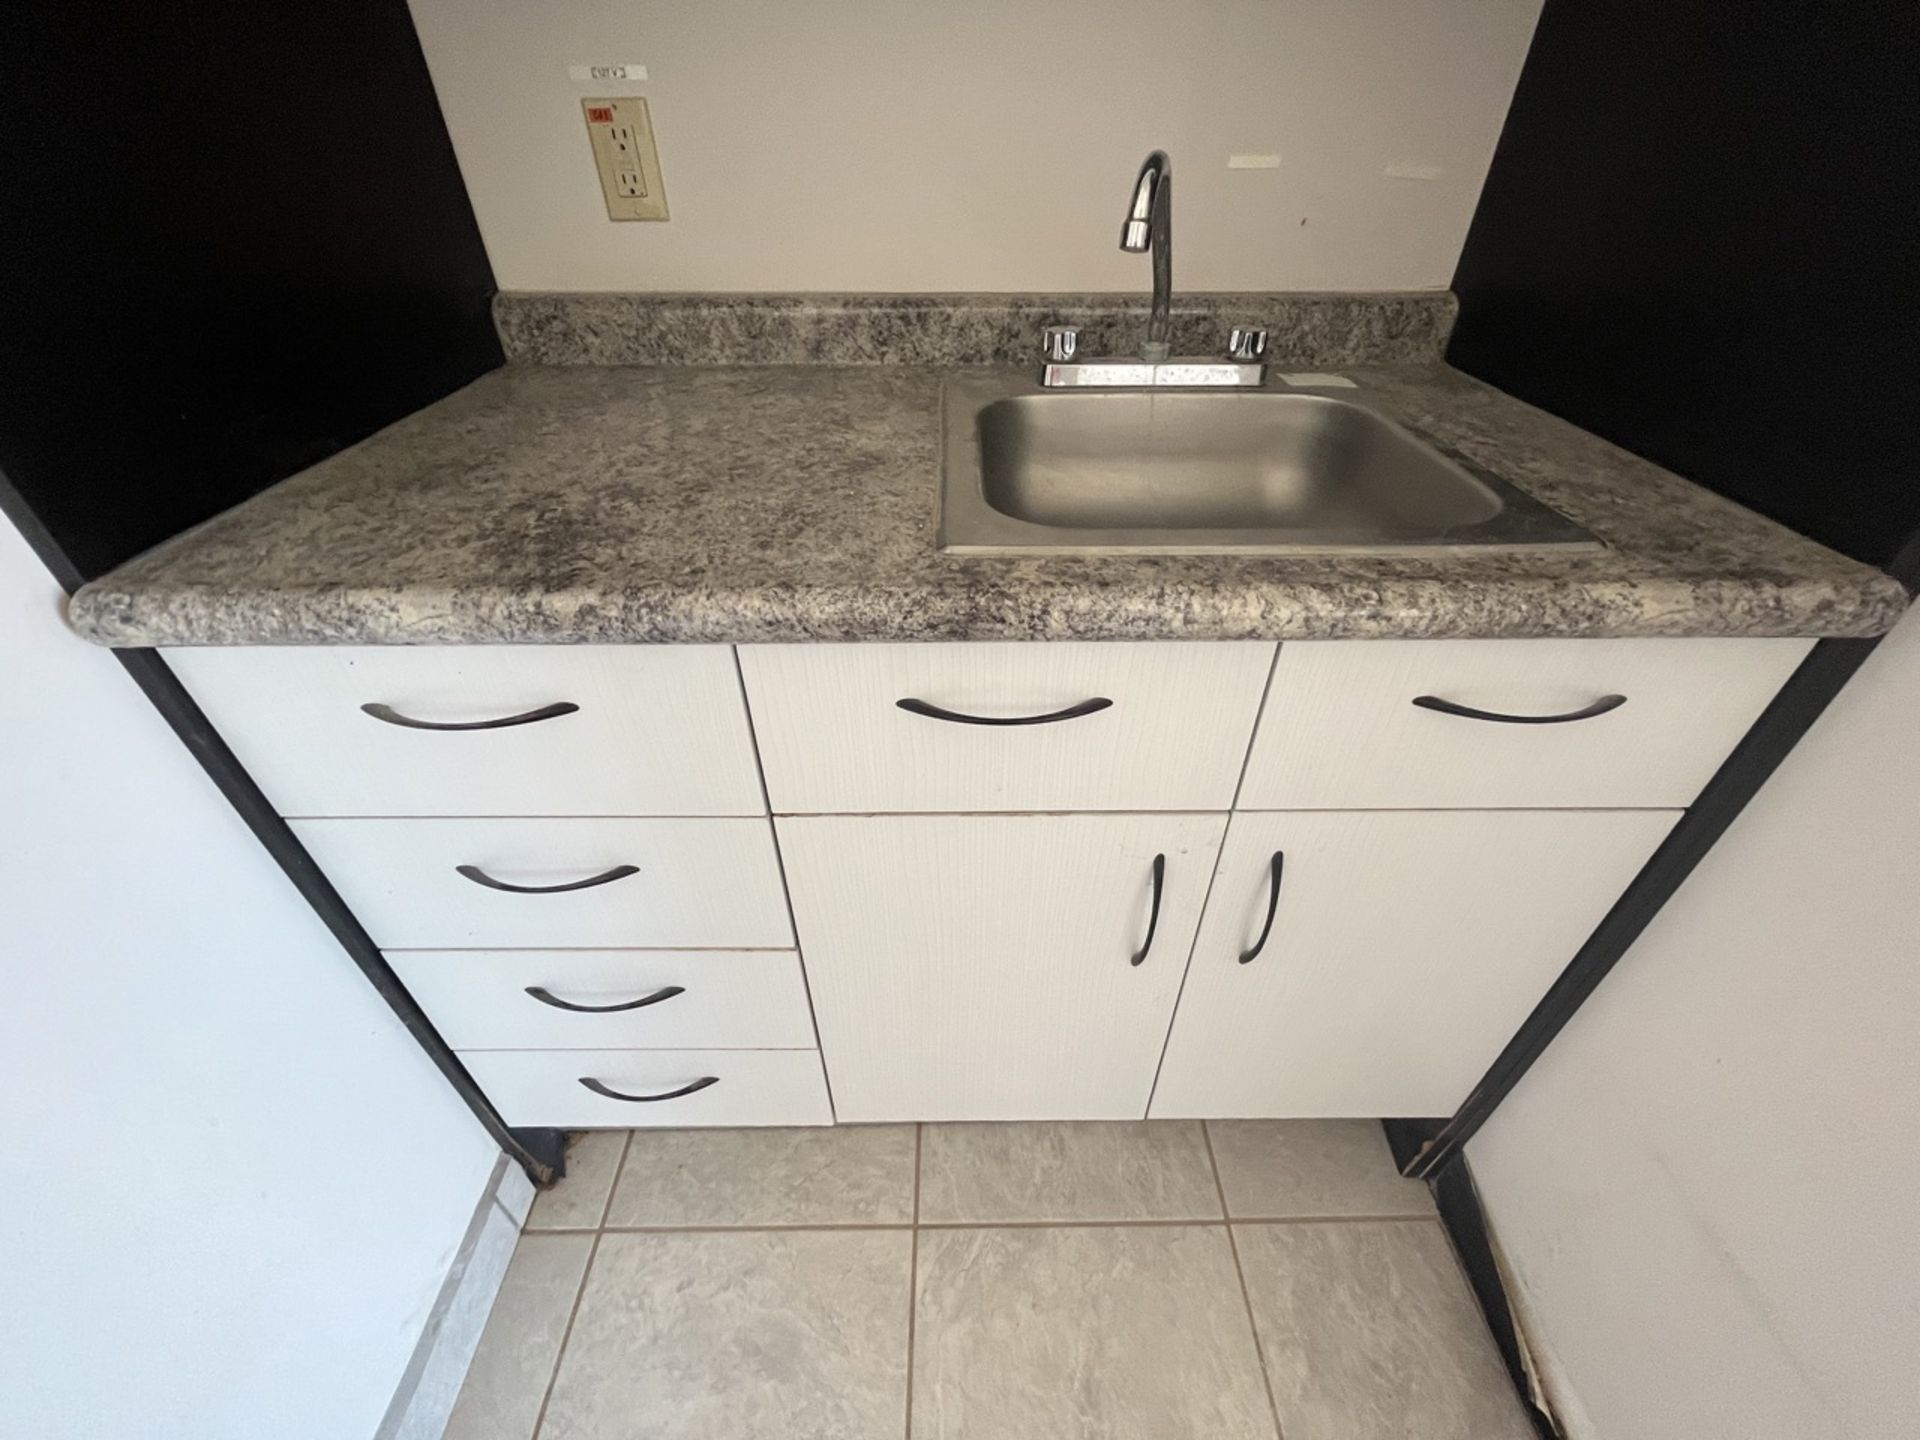 Kitchen station of 4 drawers with melamine cover with single stainless steel sink with mixer tap of - Image 6 of 13